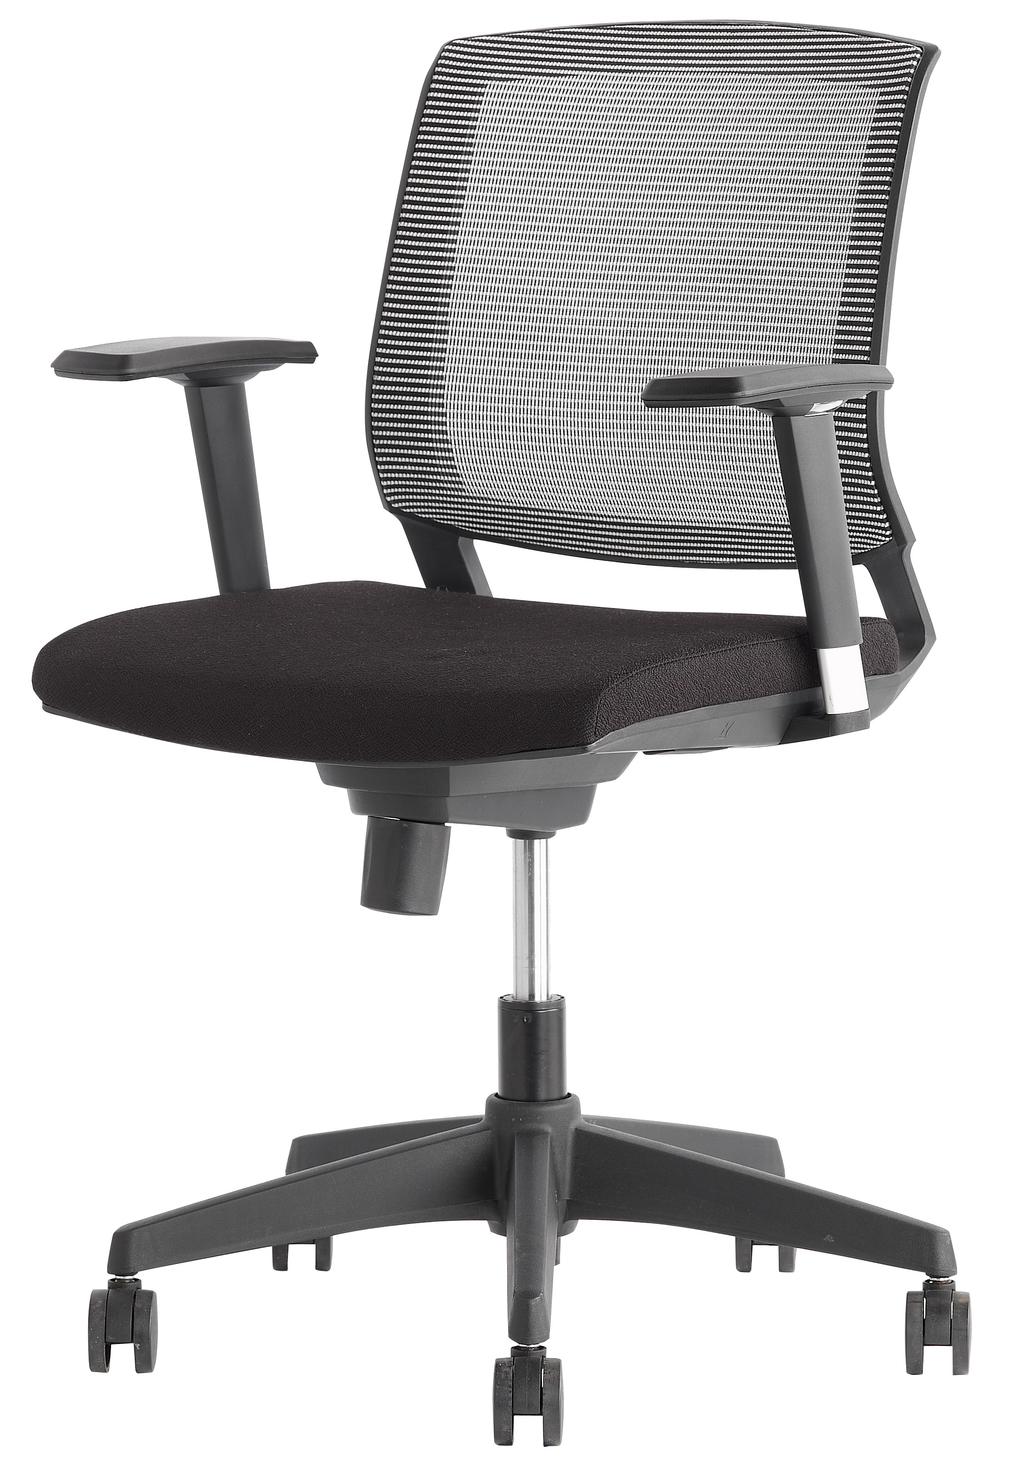 TASK SEATING AMENITY COMPACT COMFORT FEATURES